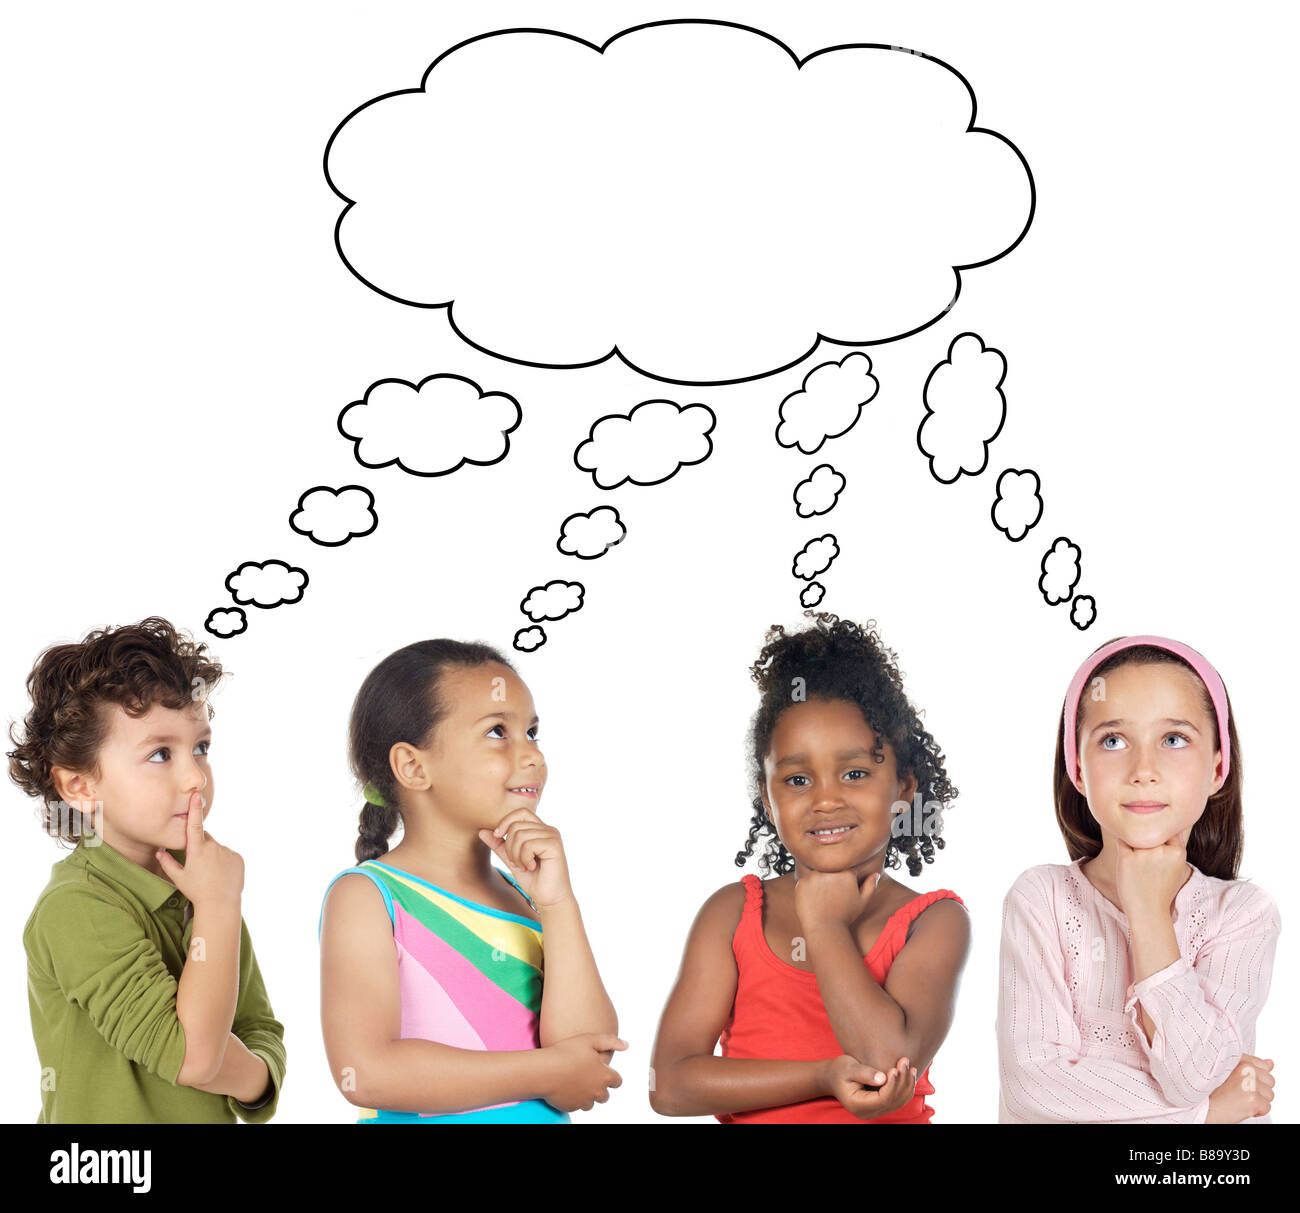 multiethnic group of children thinking a over white background Stock Photo  - Alamy